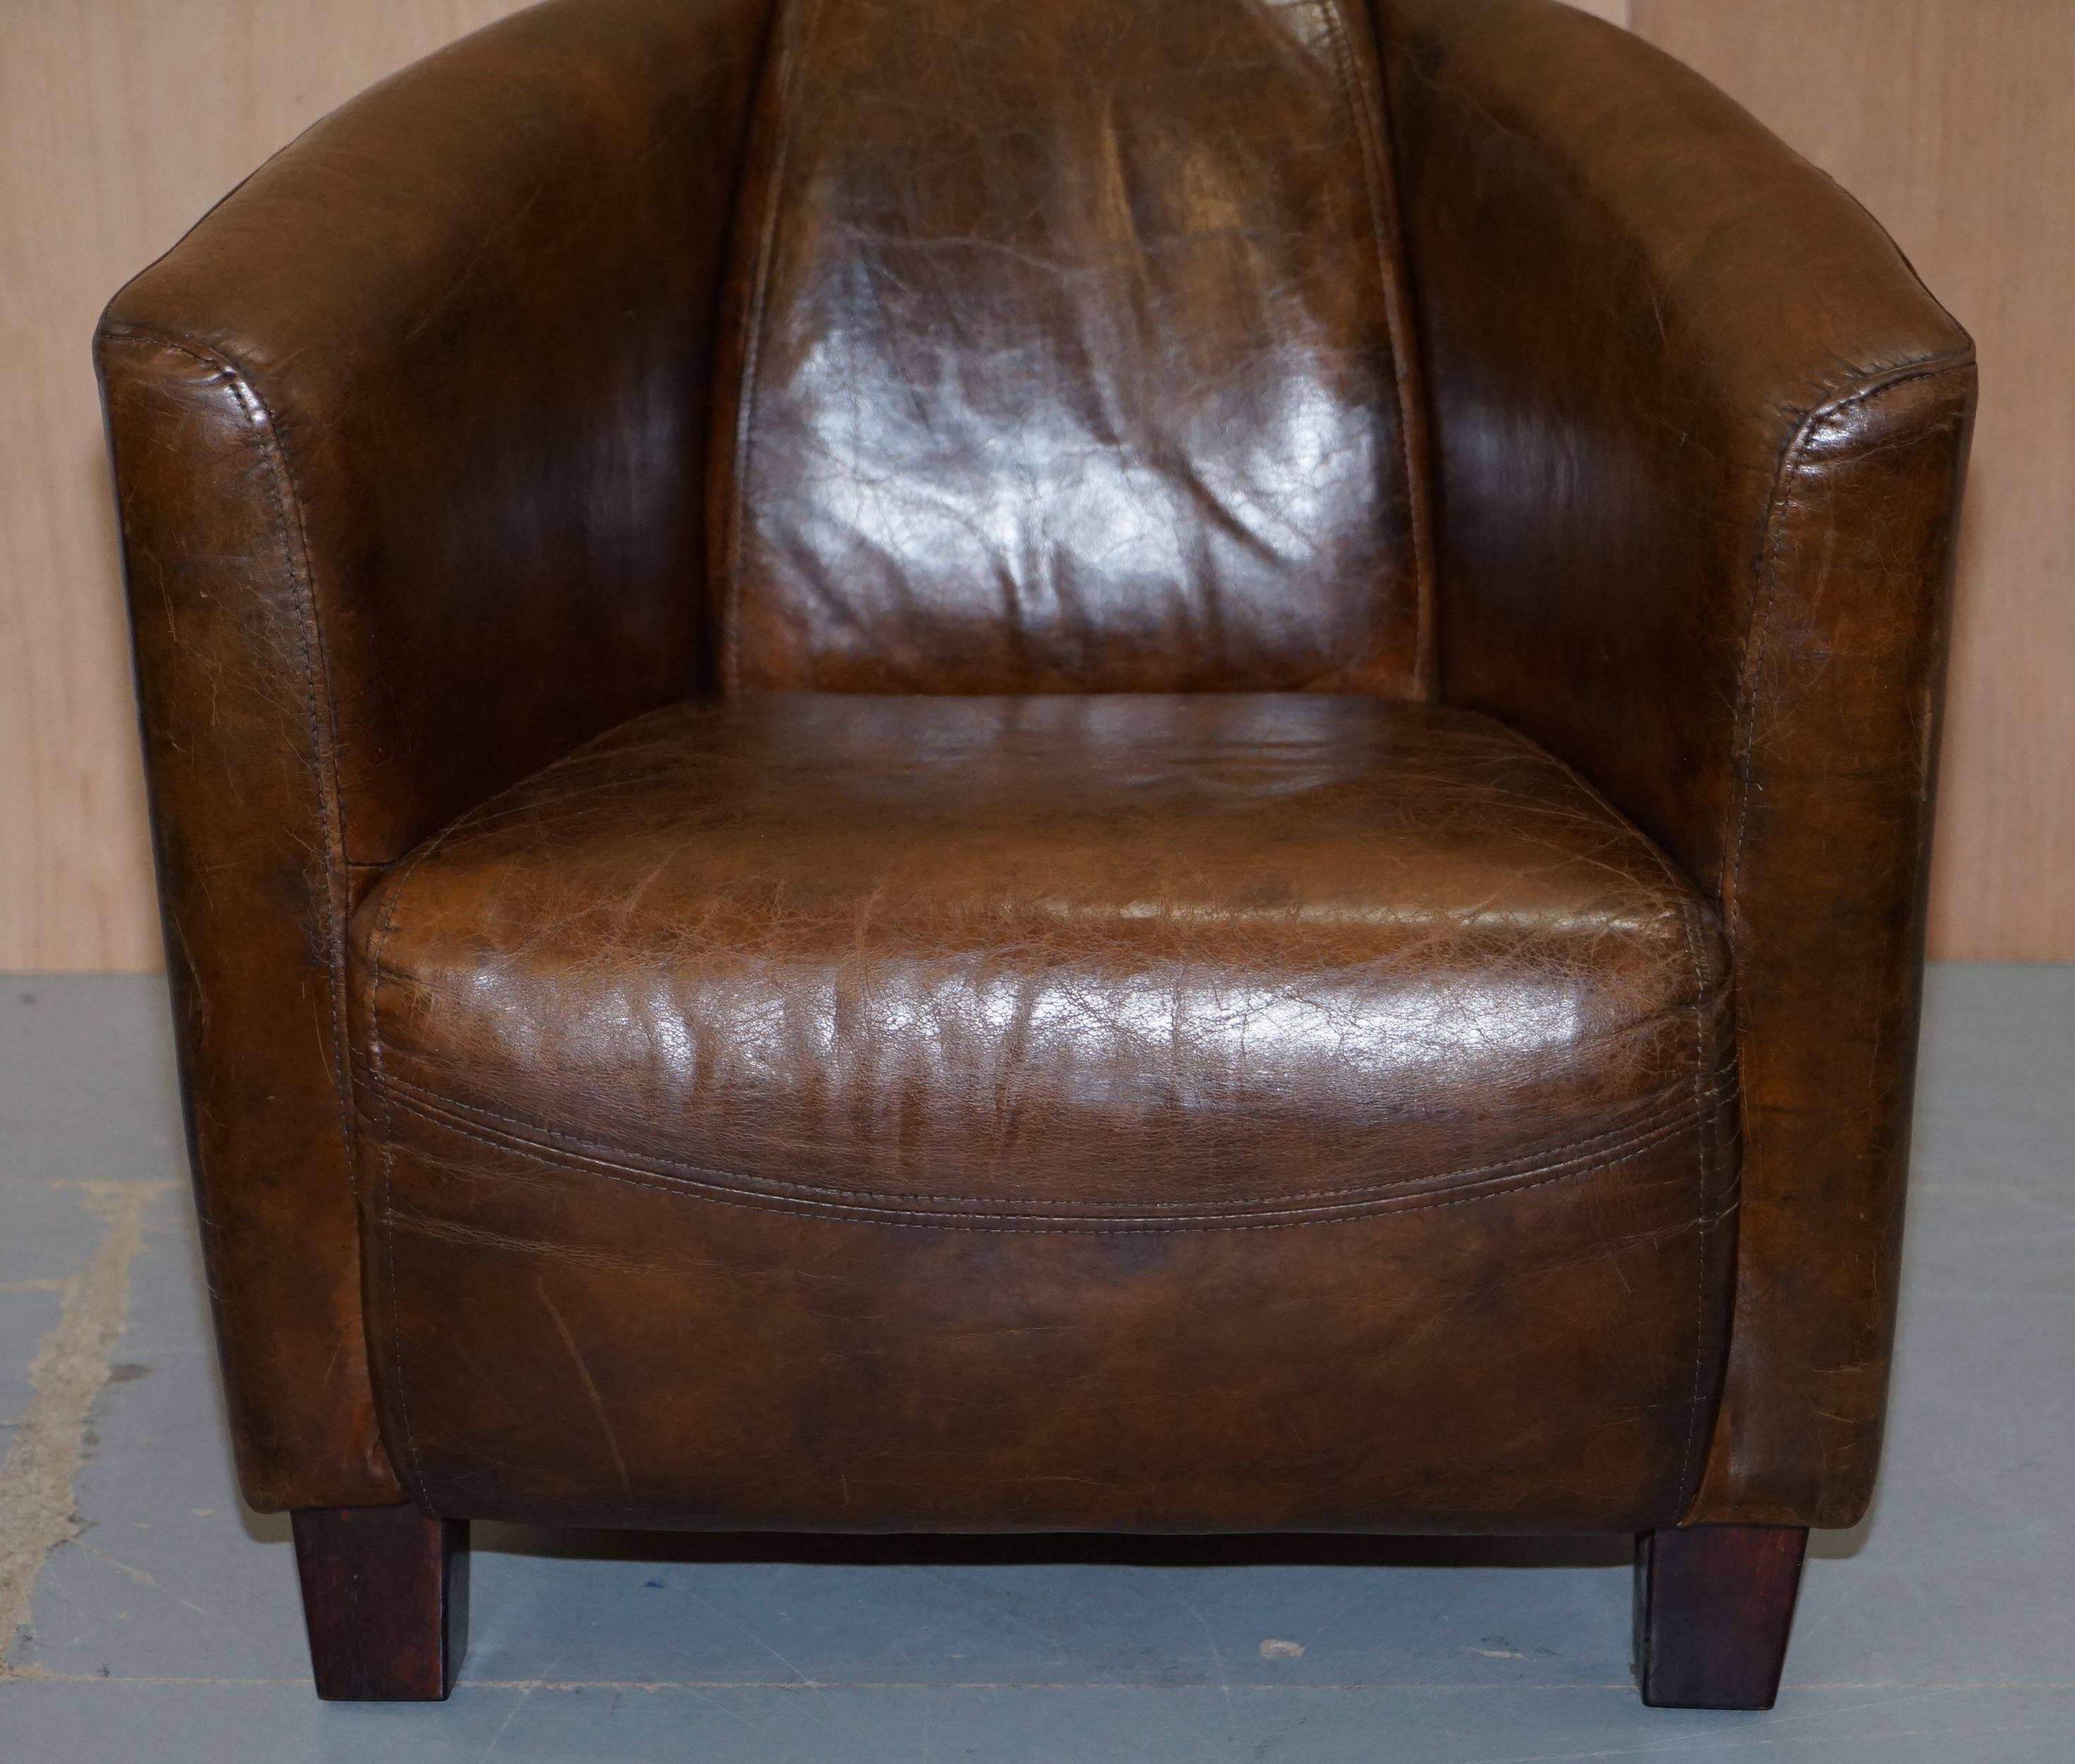 Hand-Crafted Brown Leather Halo Rocket Armchair Vintage Distressed Upholstery Solid Wood Feet